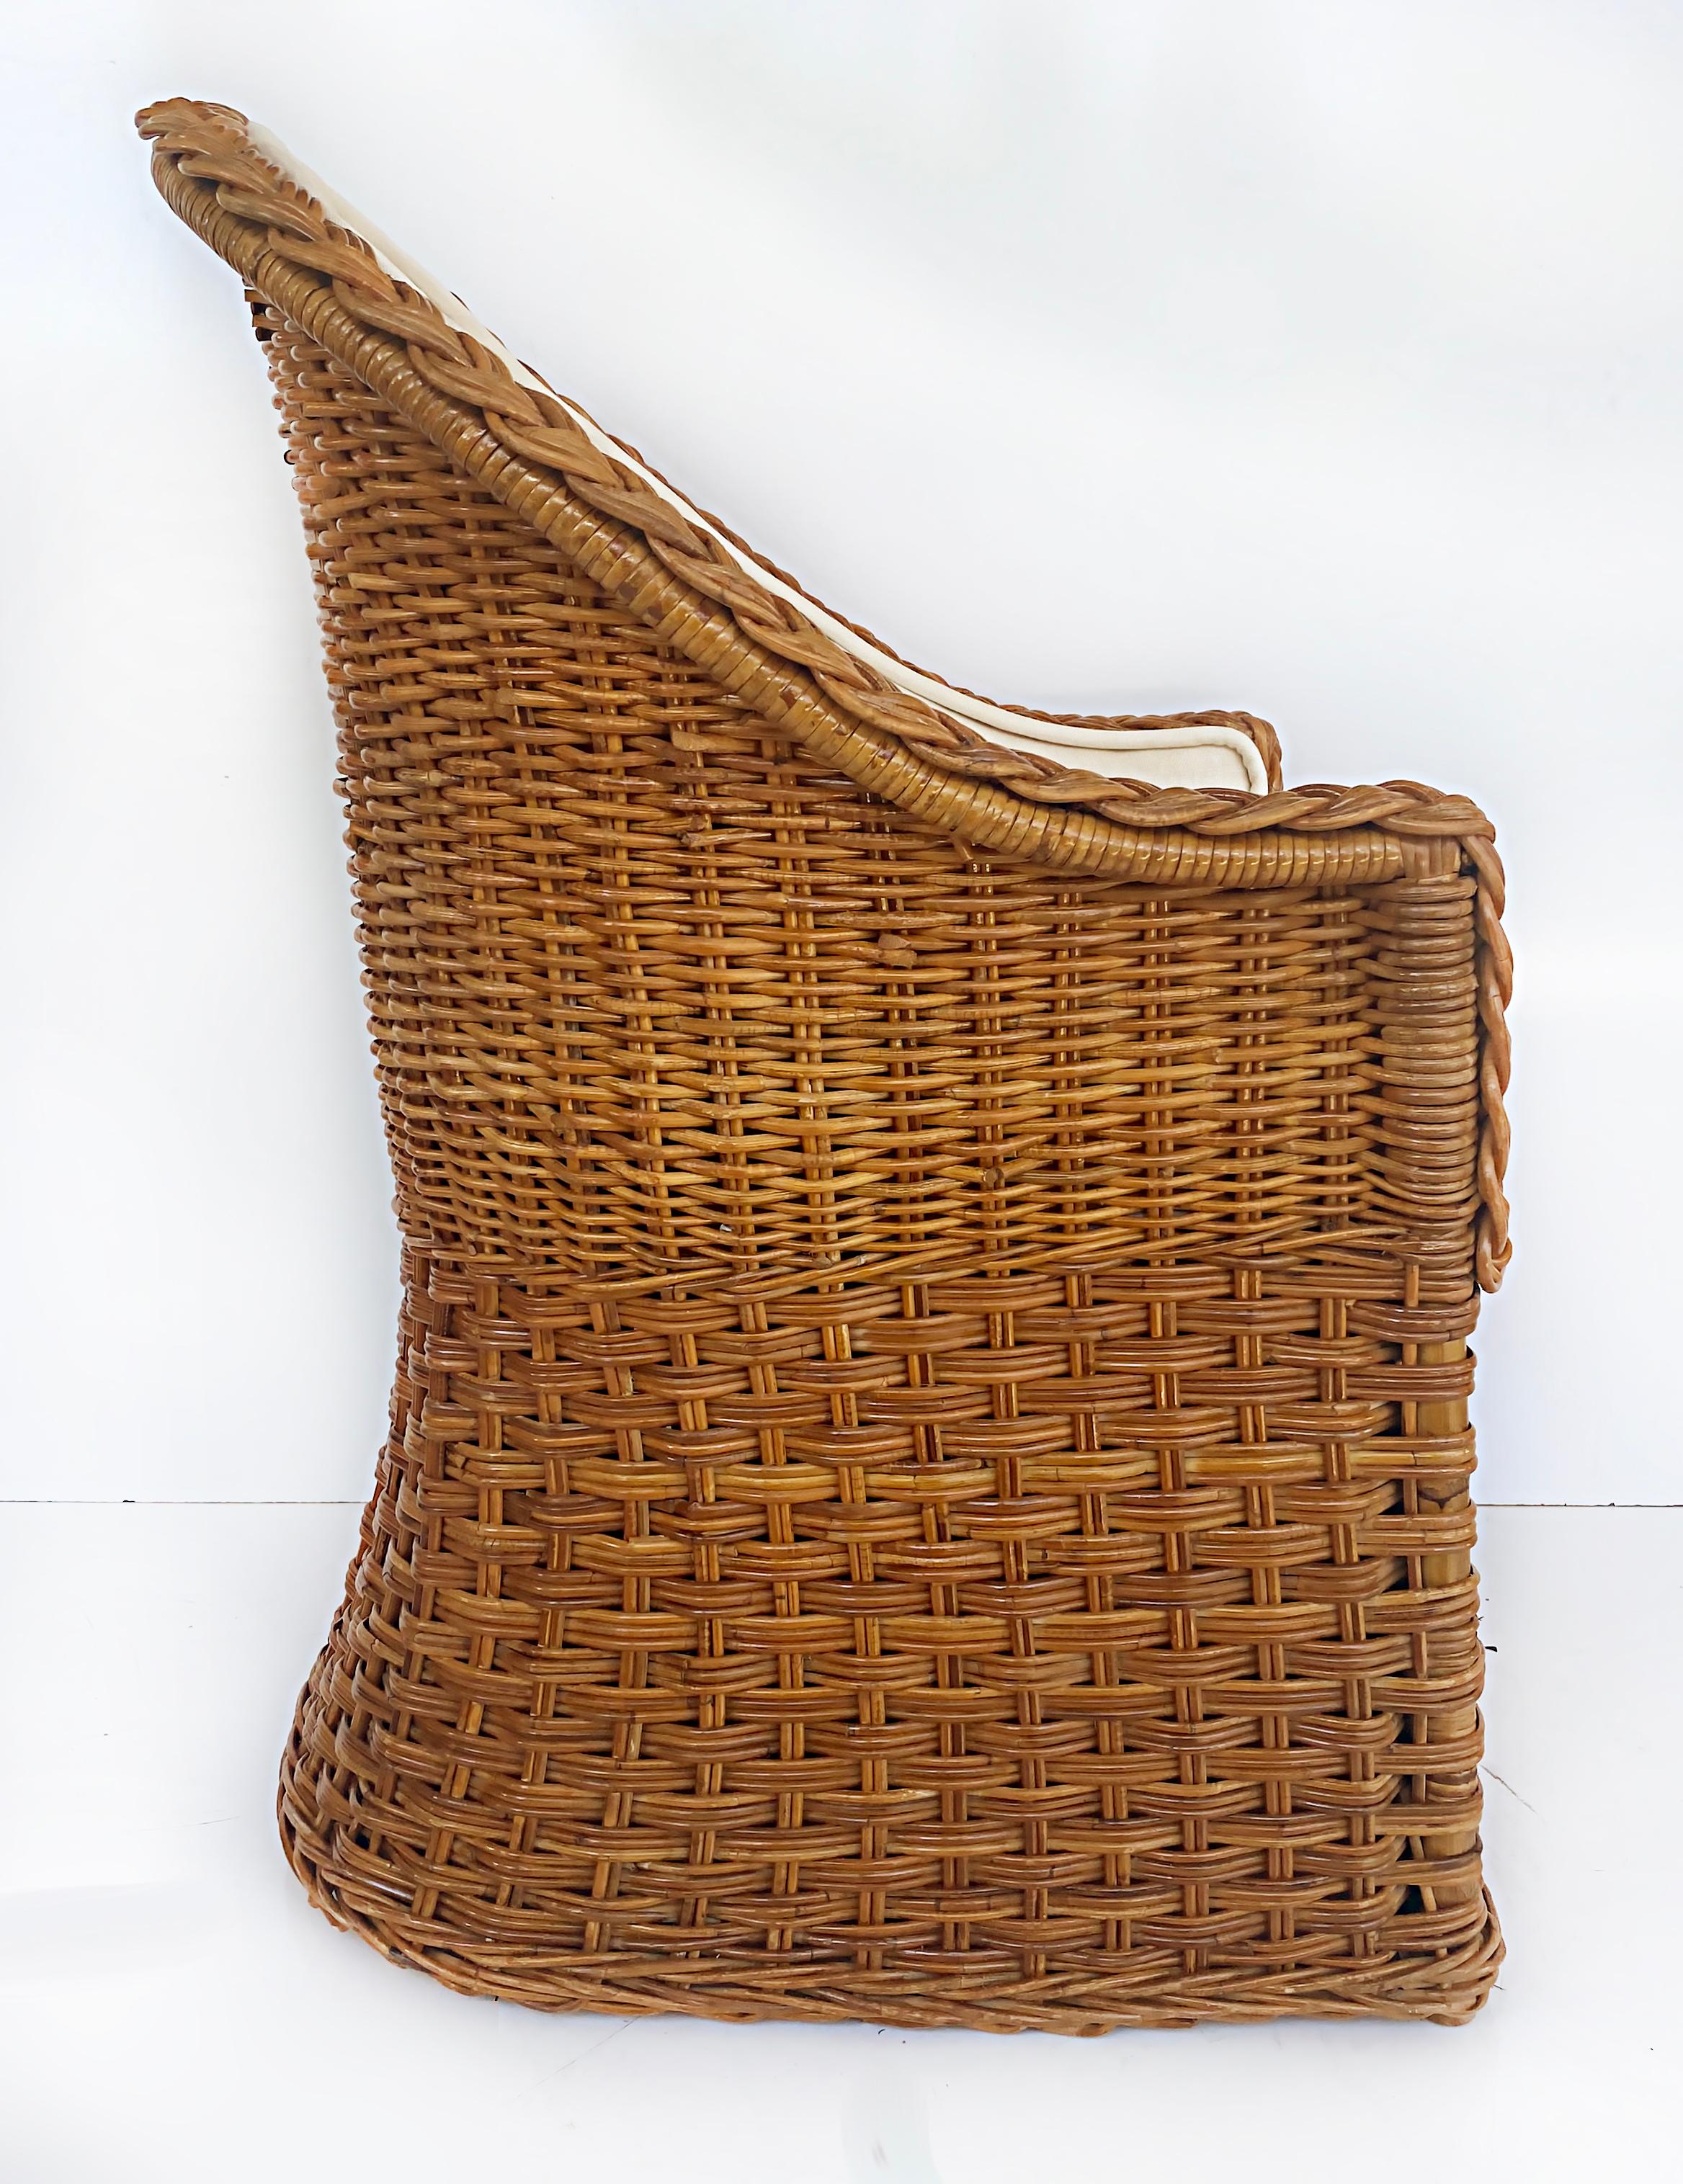 Fabric Wicker Works Braided Rattan Club Chairs, New Upholstery, 1 Pair Available For Sale